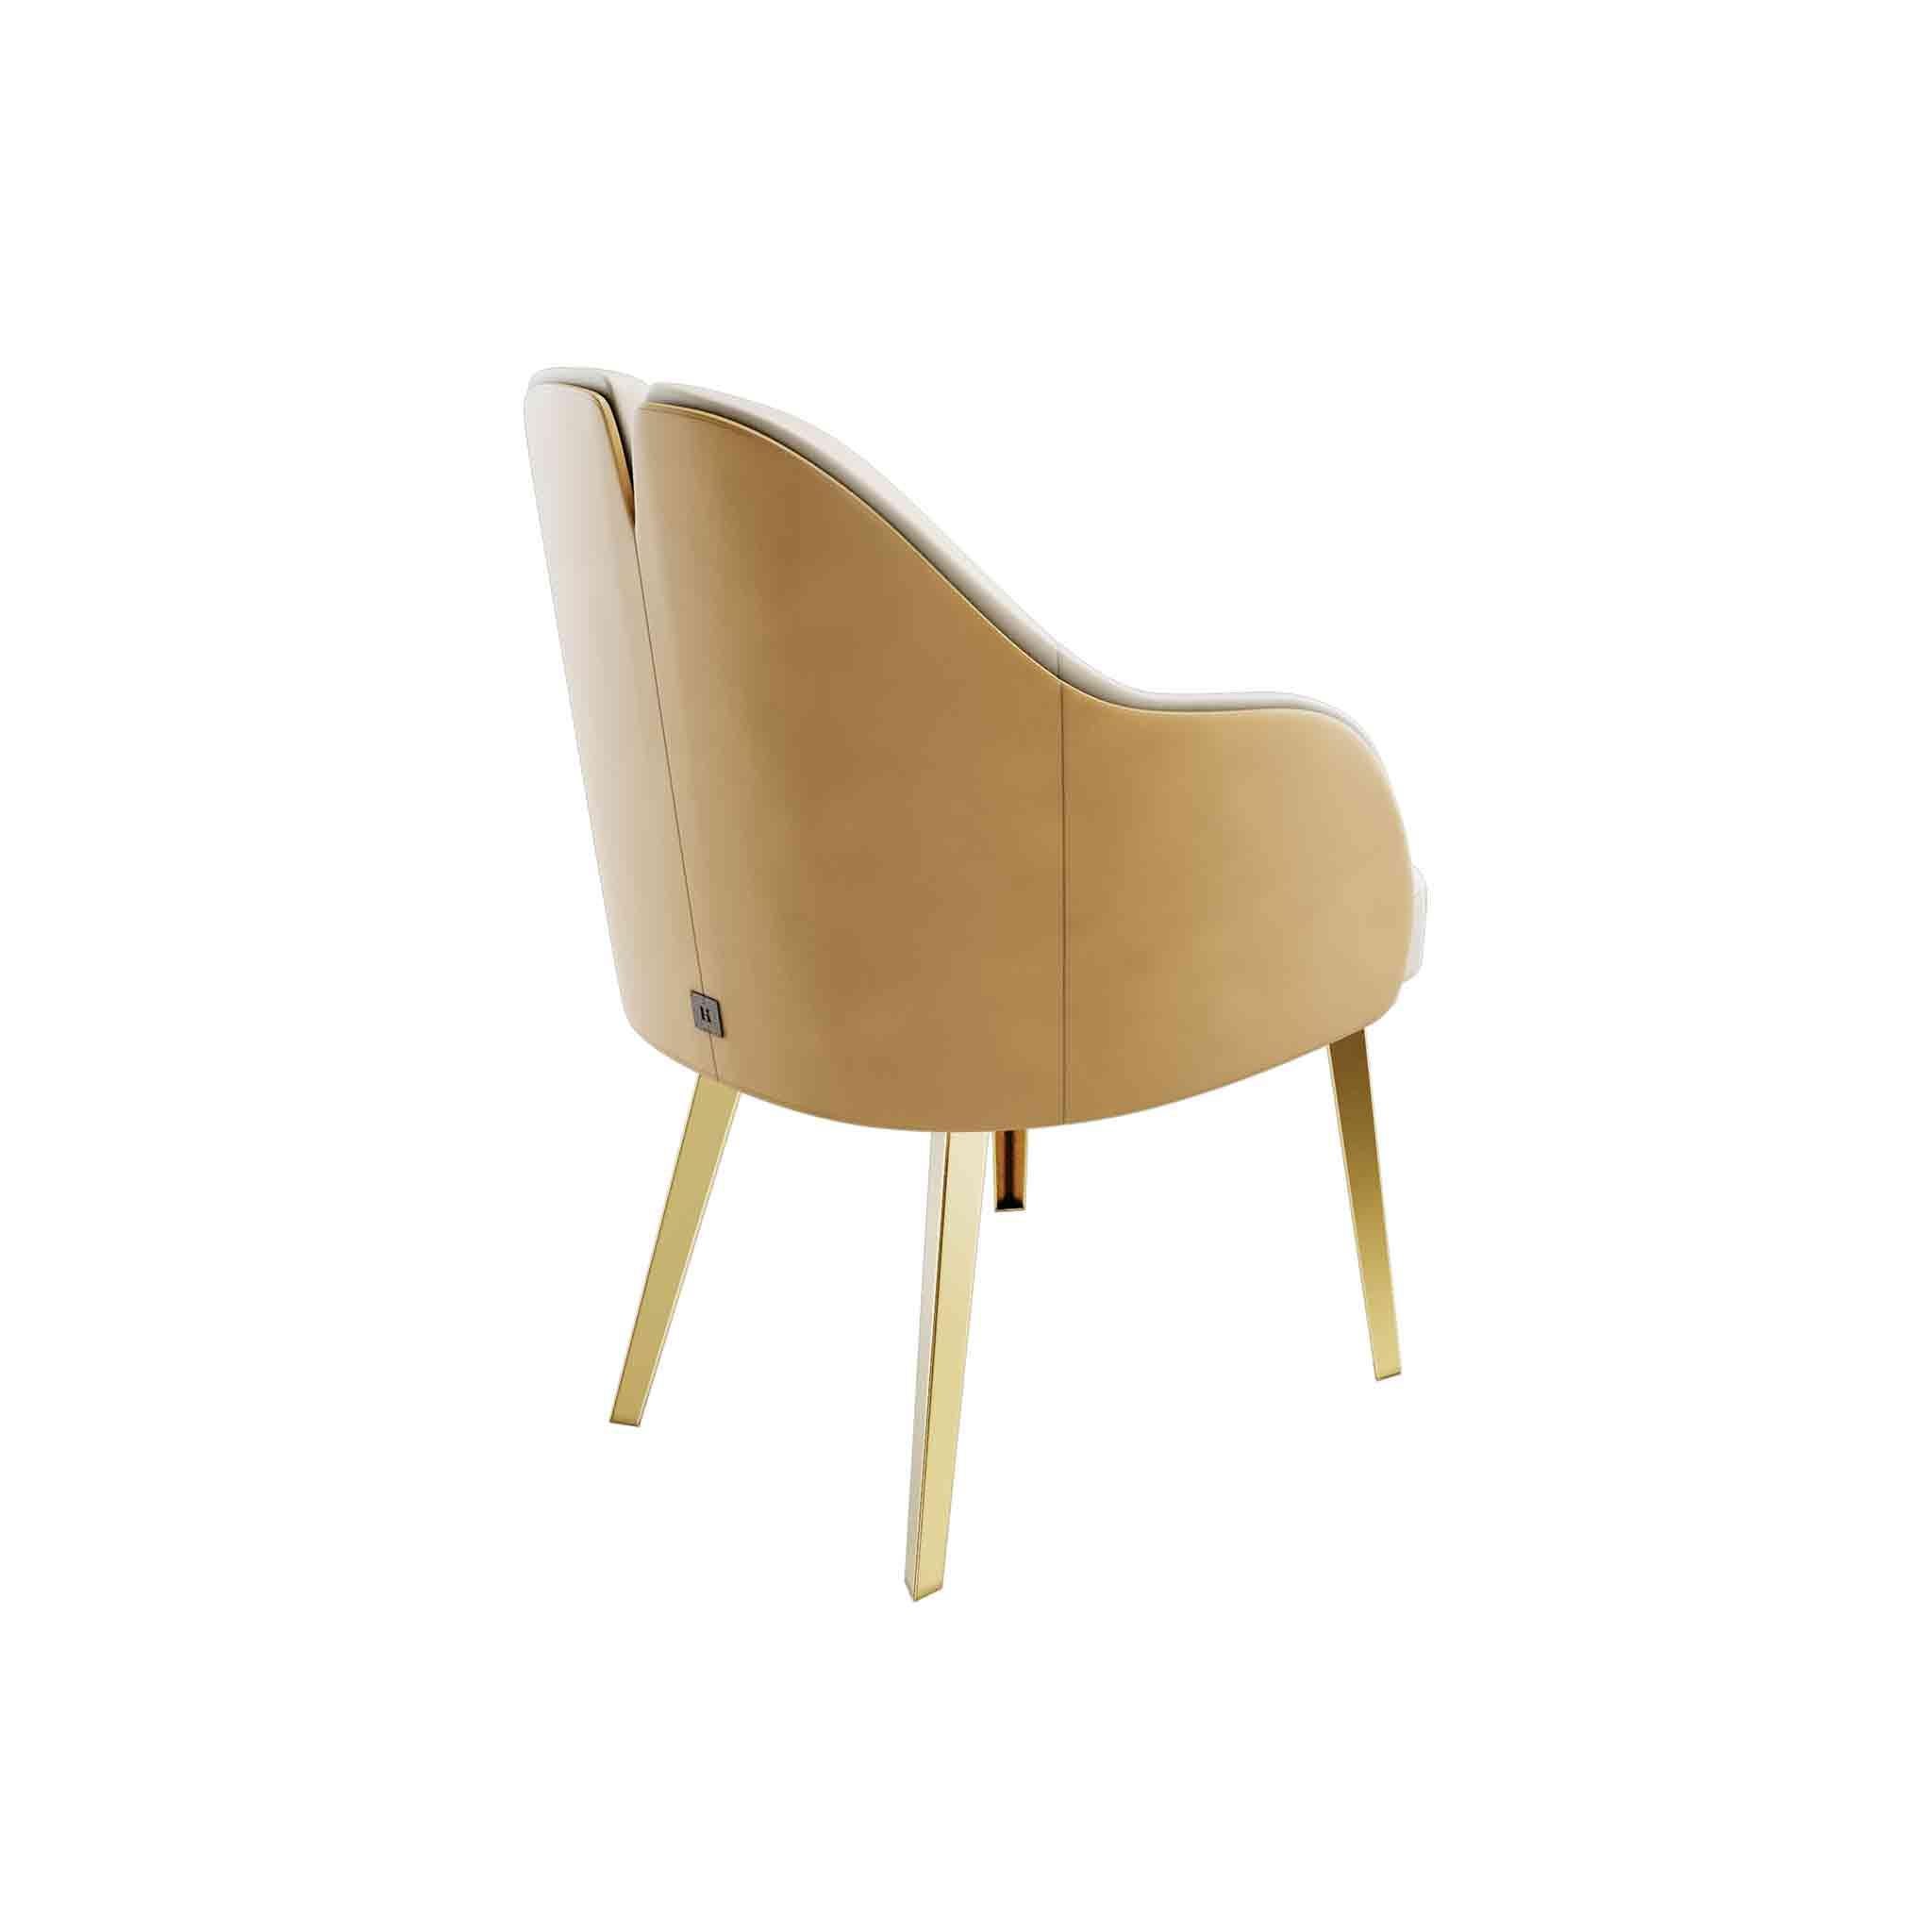 Portuguese Modern Classic Dining Room Chair in Leather & Polished Golden Brass Details For Sale